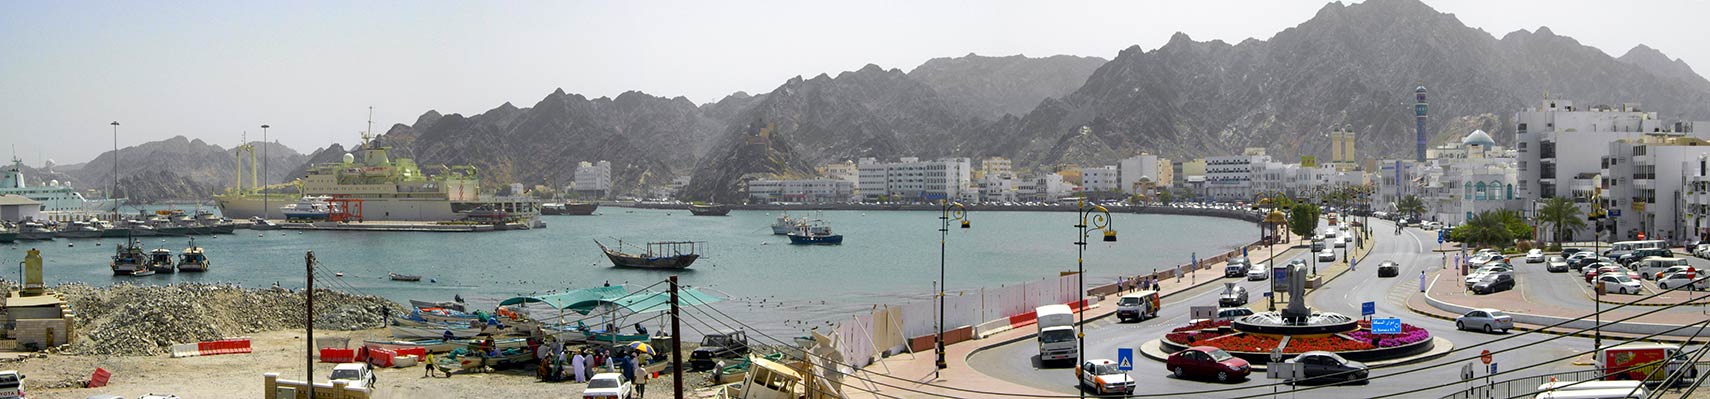 Muscat with the port and corniche